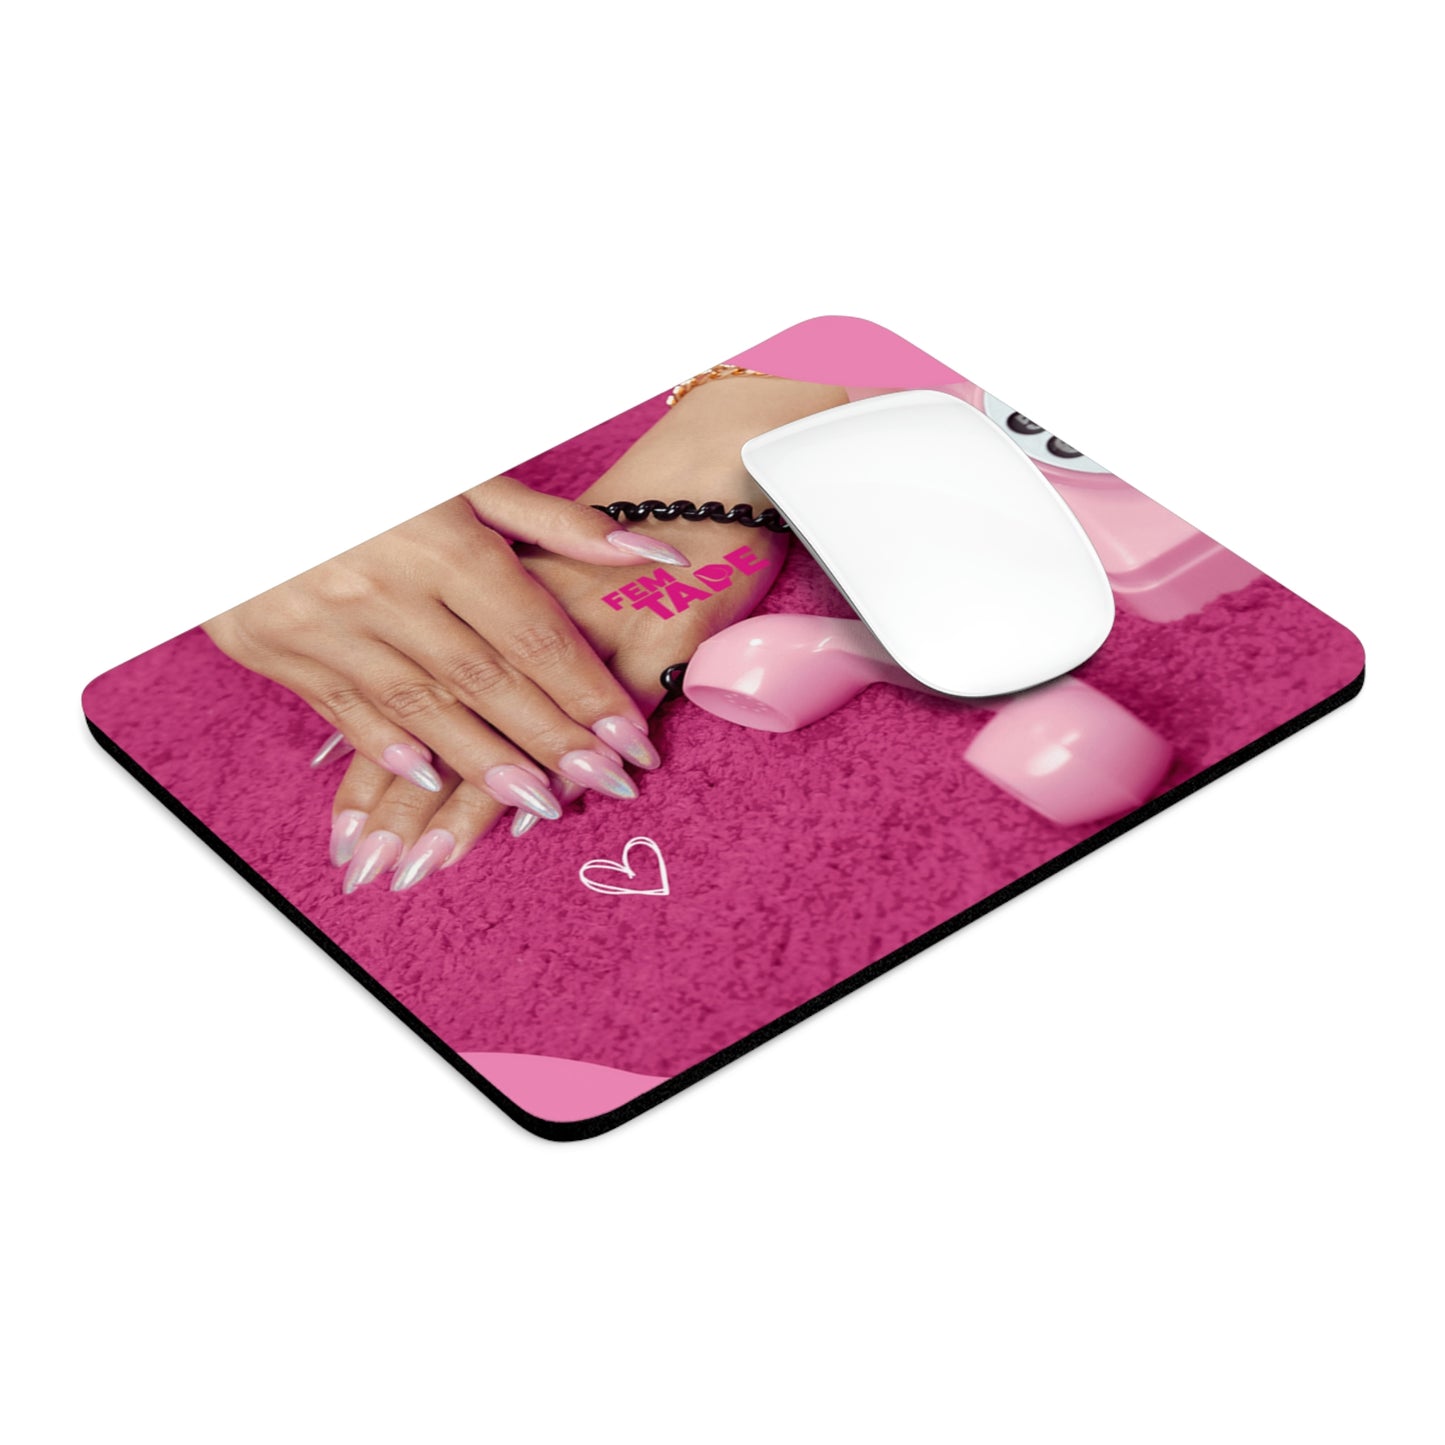 Mouse Pad "Just call me baby" Promocionales FemTape